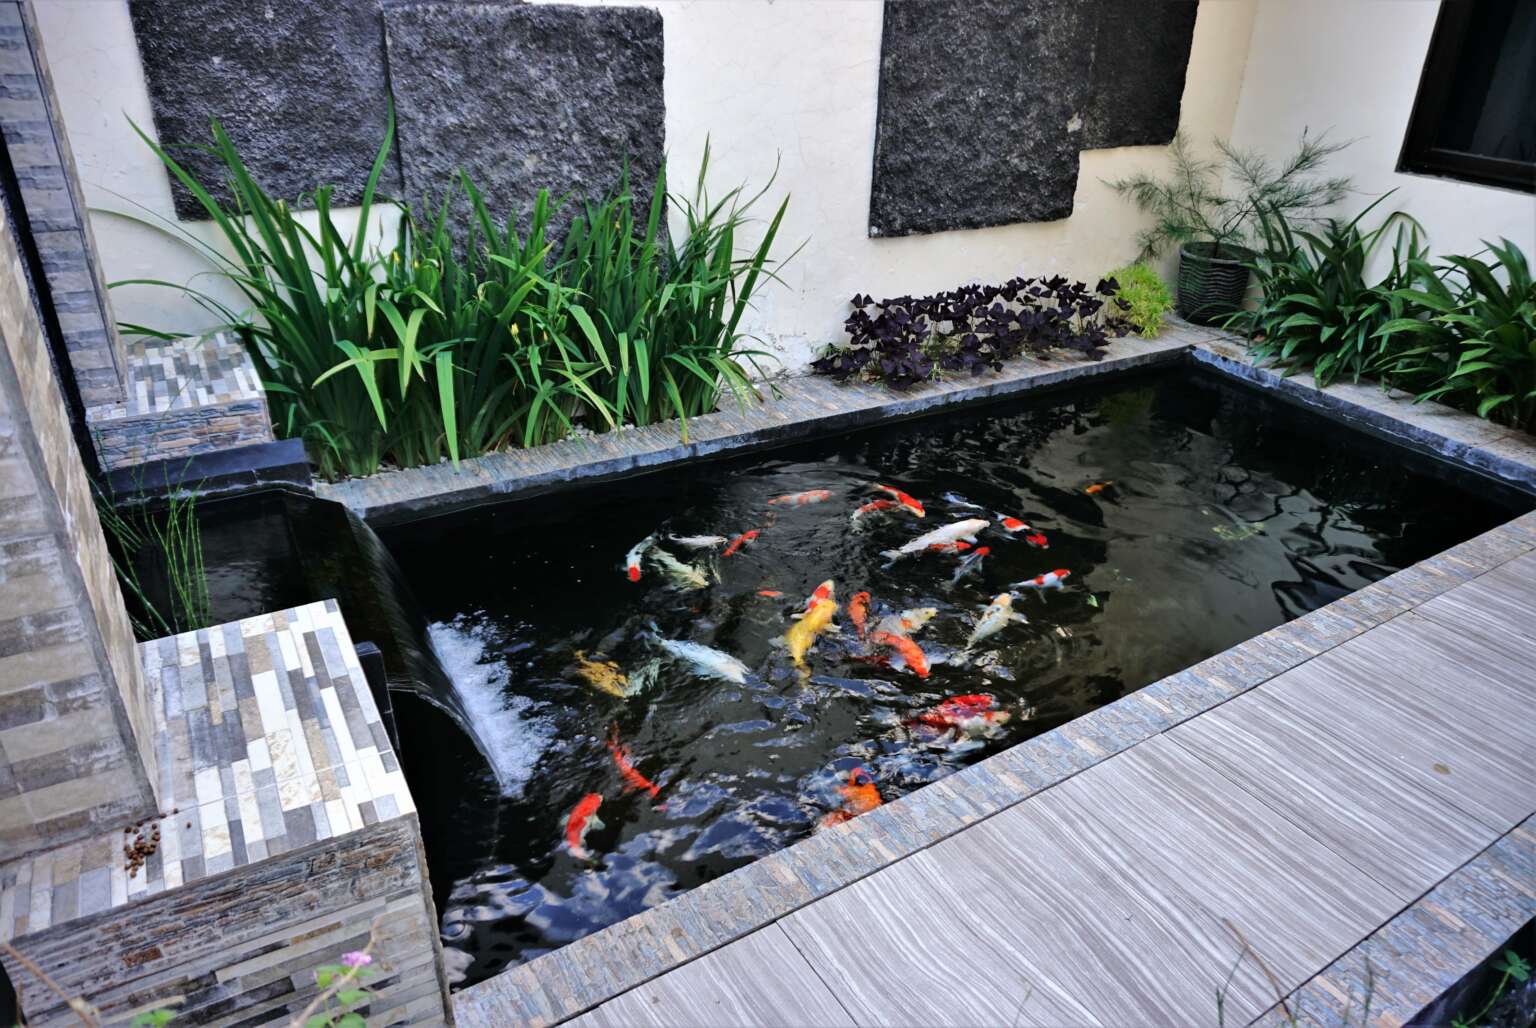 What fish do you put in a fish pond and why?